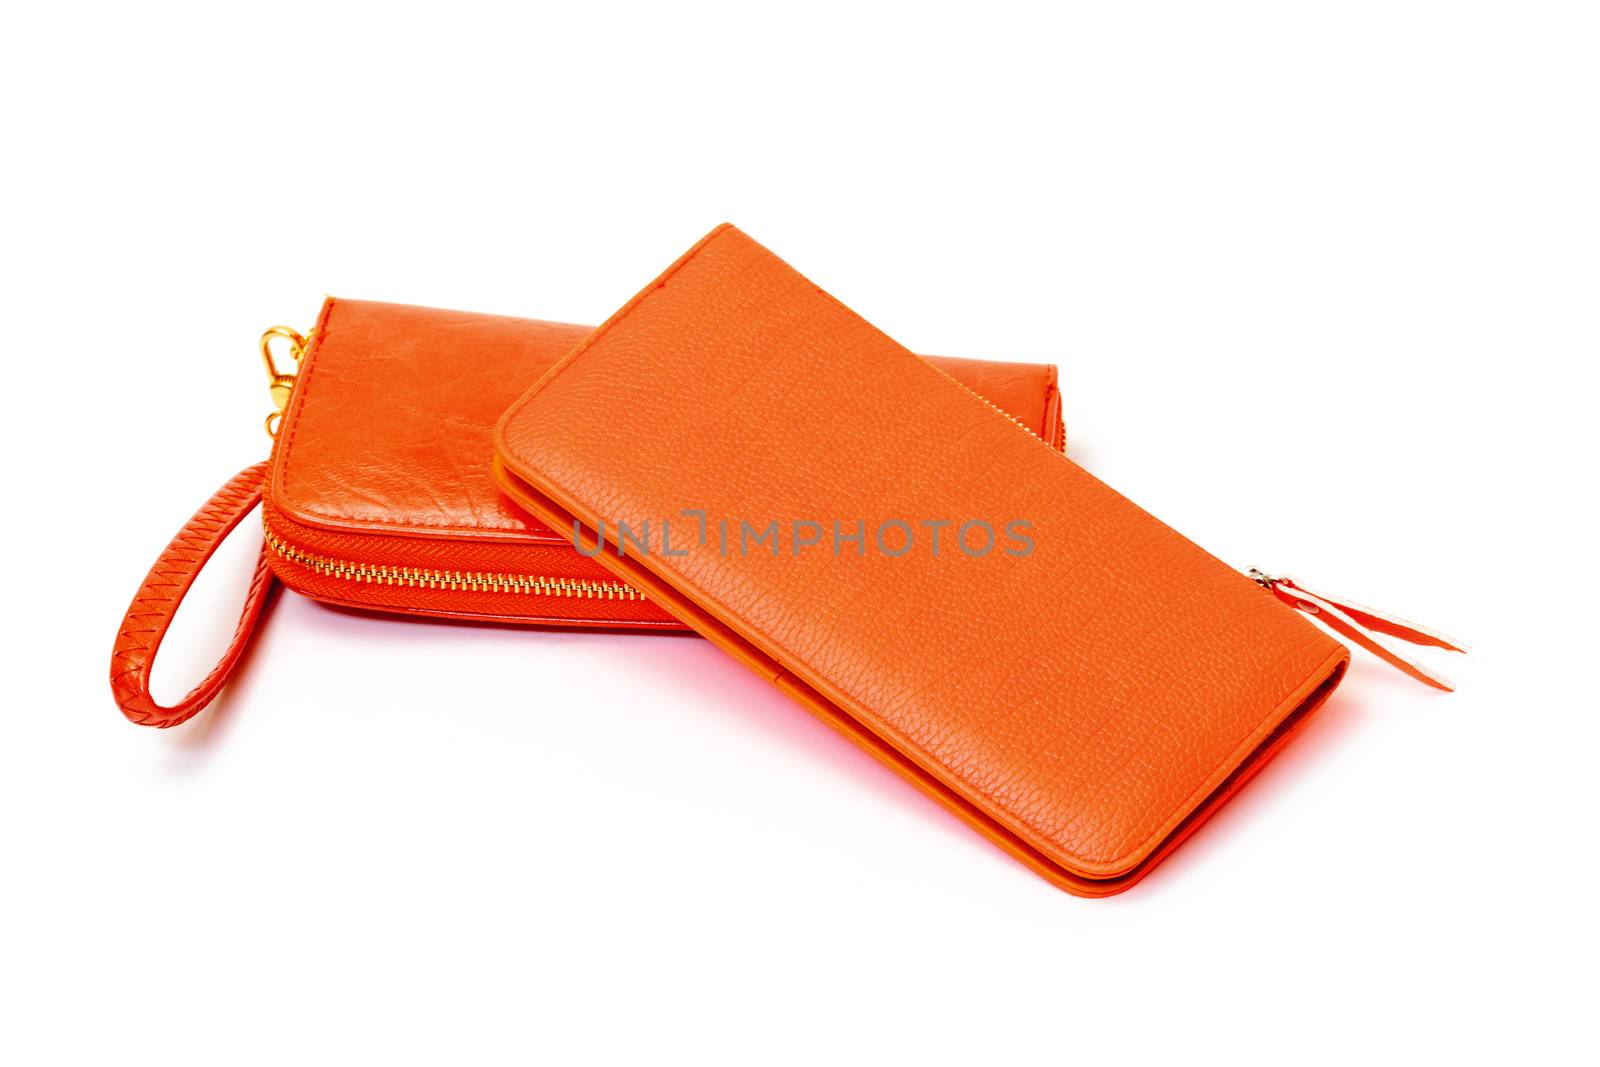 New Orange Leather Wallets by Discovod